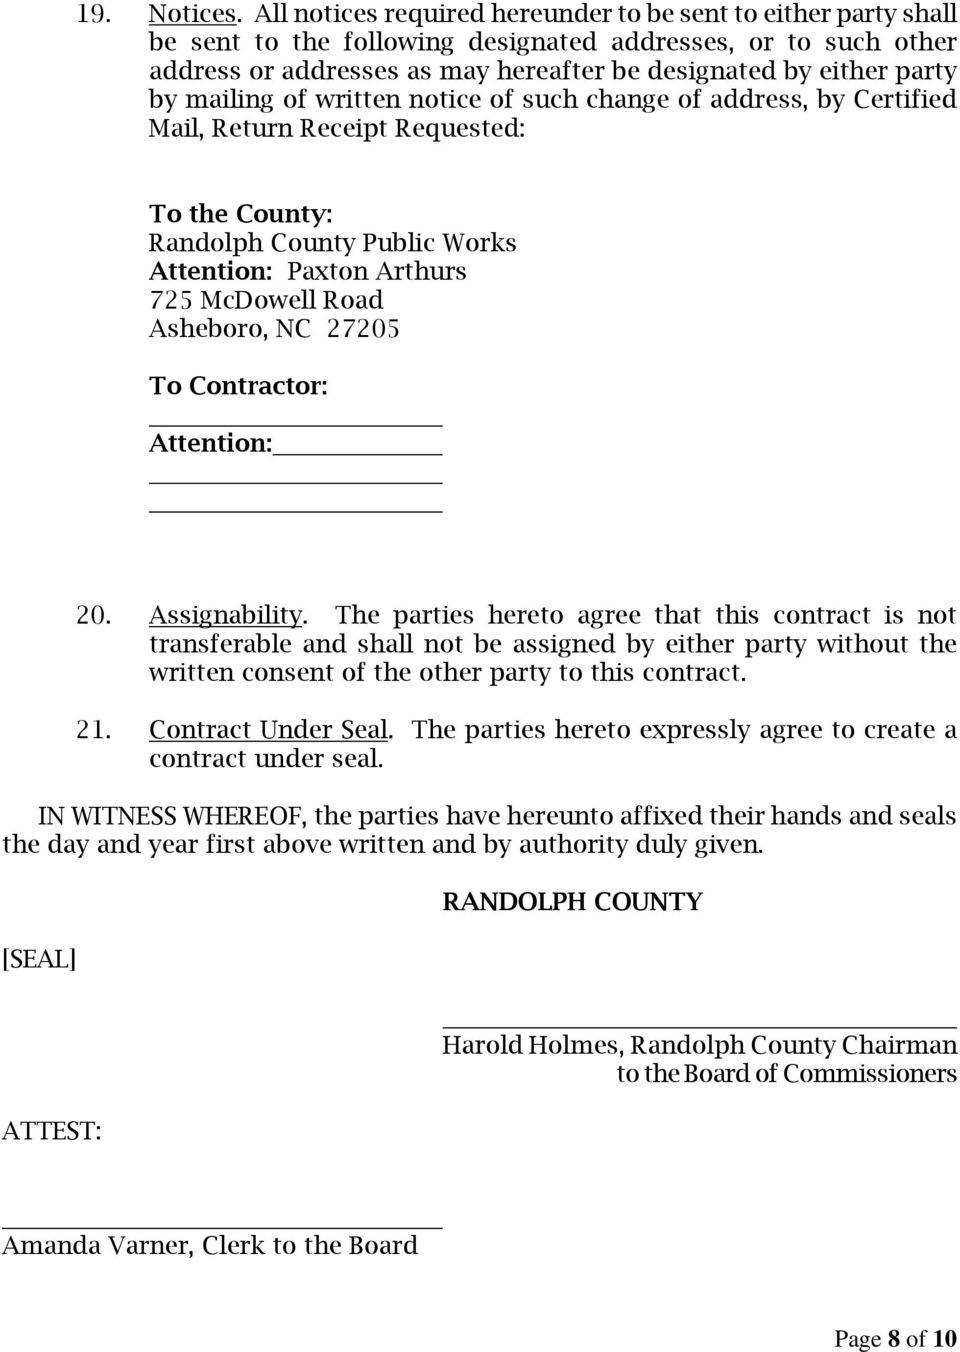 mailing of written notice of such change of address, by Certified Mail, Return Receipt Requested: To the County: Randolph County Public Works Attention: Paxton Arthurs 725 McDowell Road Asheboro, NC